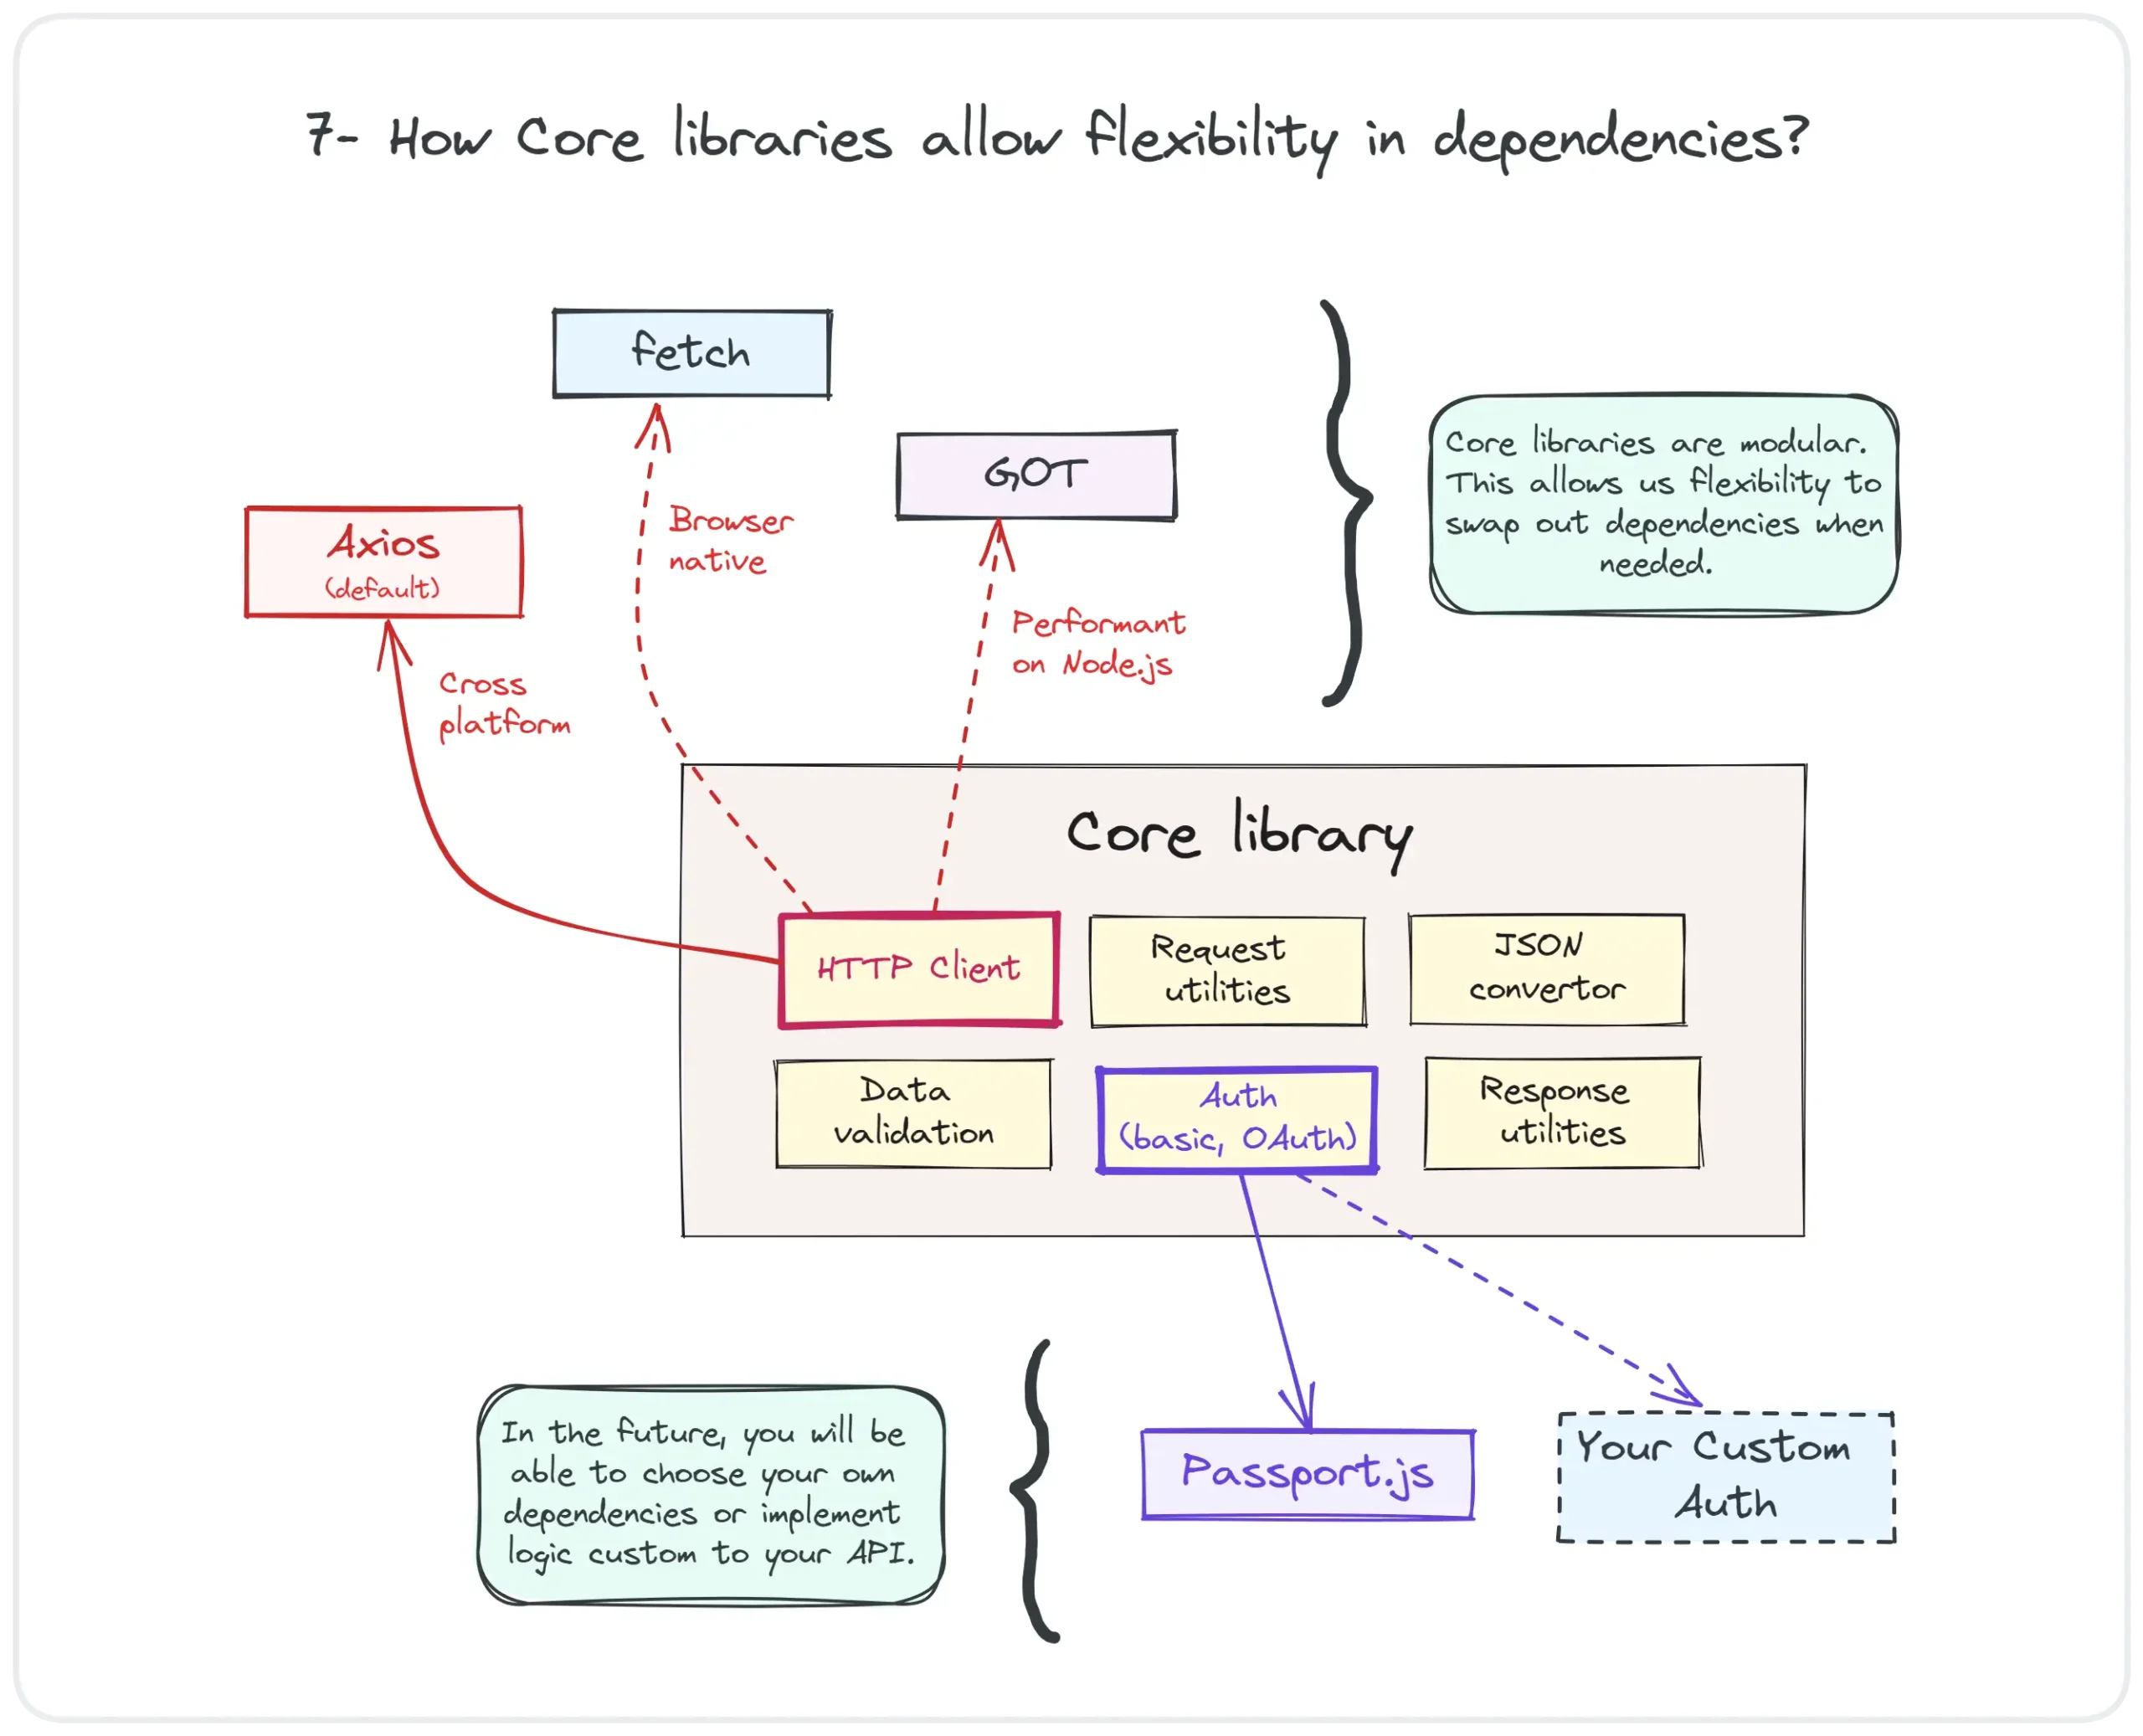 How Core libraries allow flexibility in dependencies?